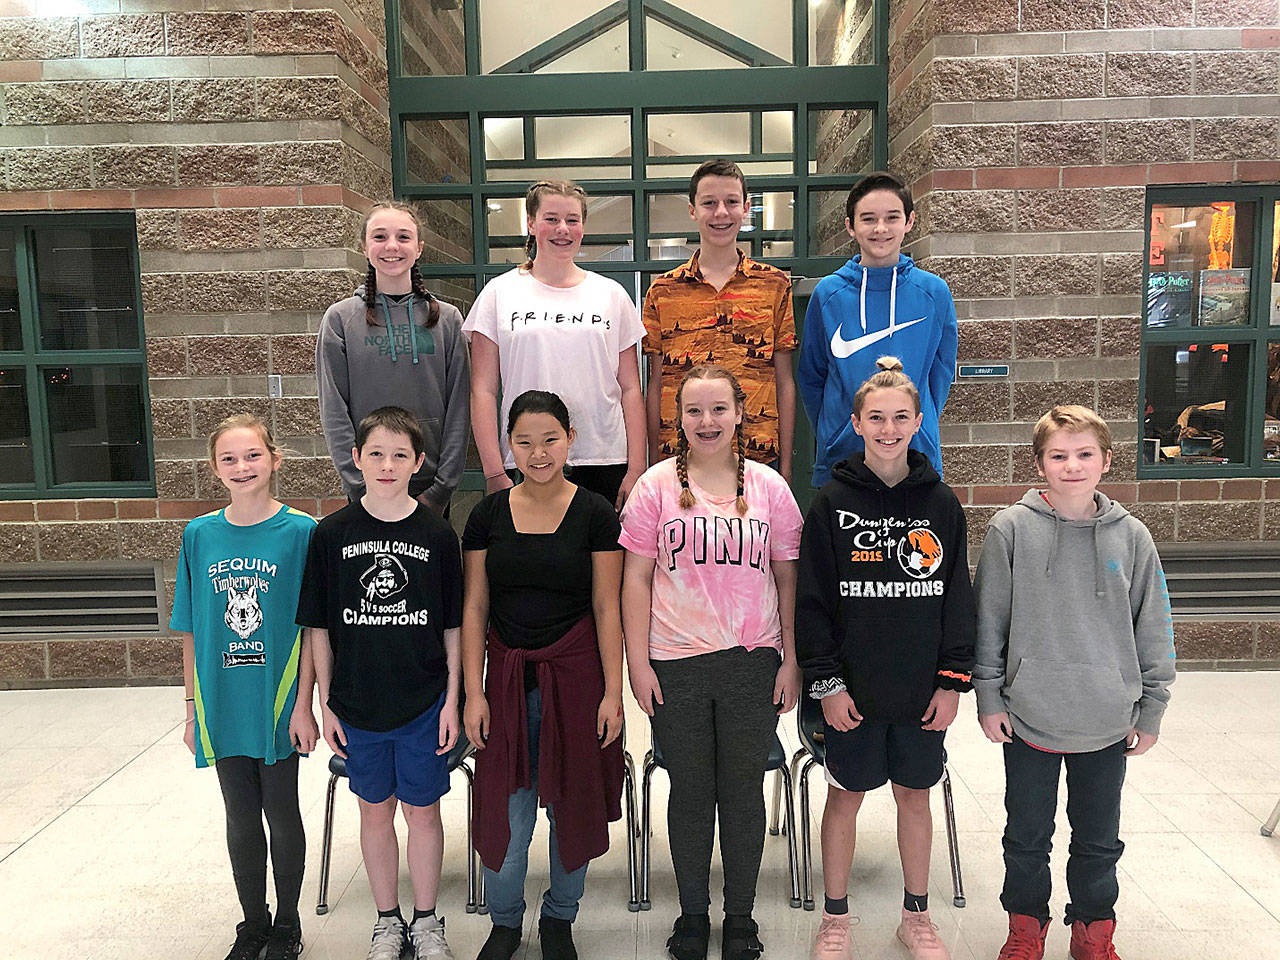 Sequim Middle School science “Catalysts” for Term 1 include, back row from left, Taylor Heyting, Paige Krzyworz, Aason Judd and Jamison Gray, and (front row, from left) Elizabeth Beebe, Kyhlan Henderson, Avangeline McGee, Mariah Stringer, Lake Barrett and Dreyden Endicott. SUbmitted photo